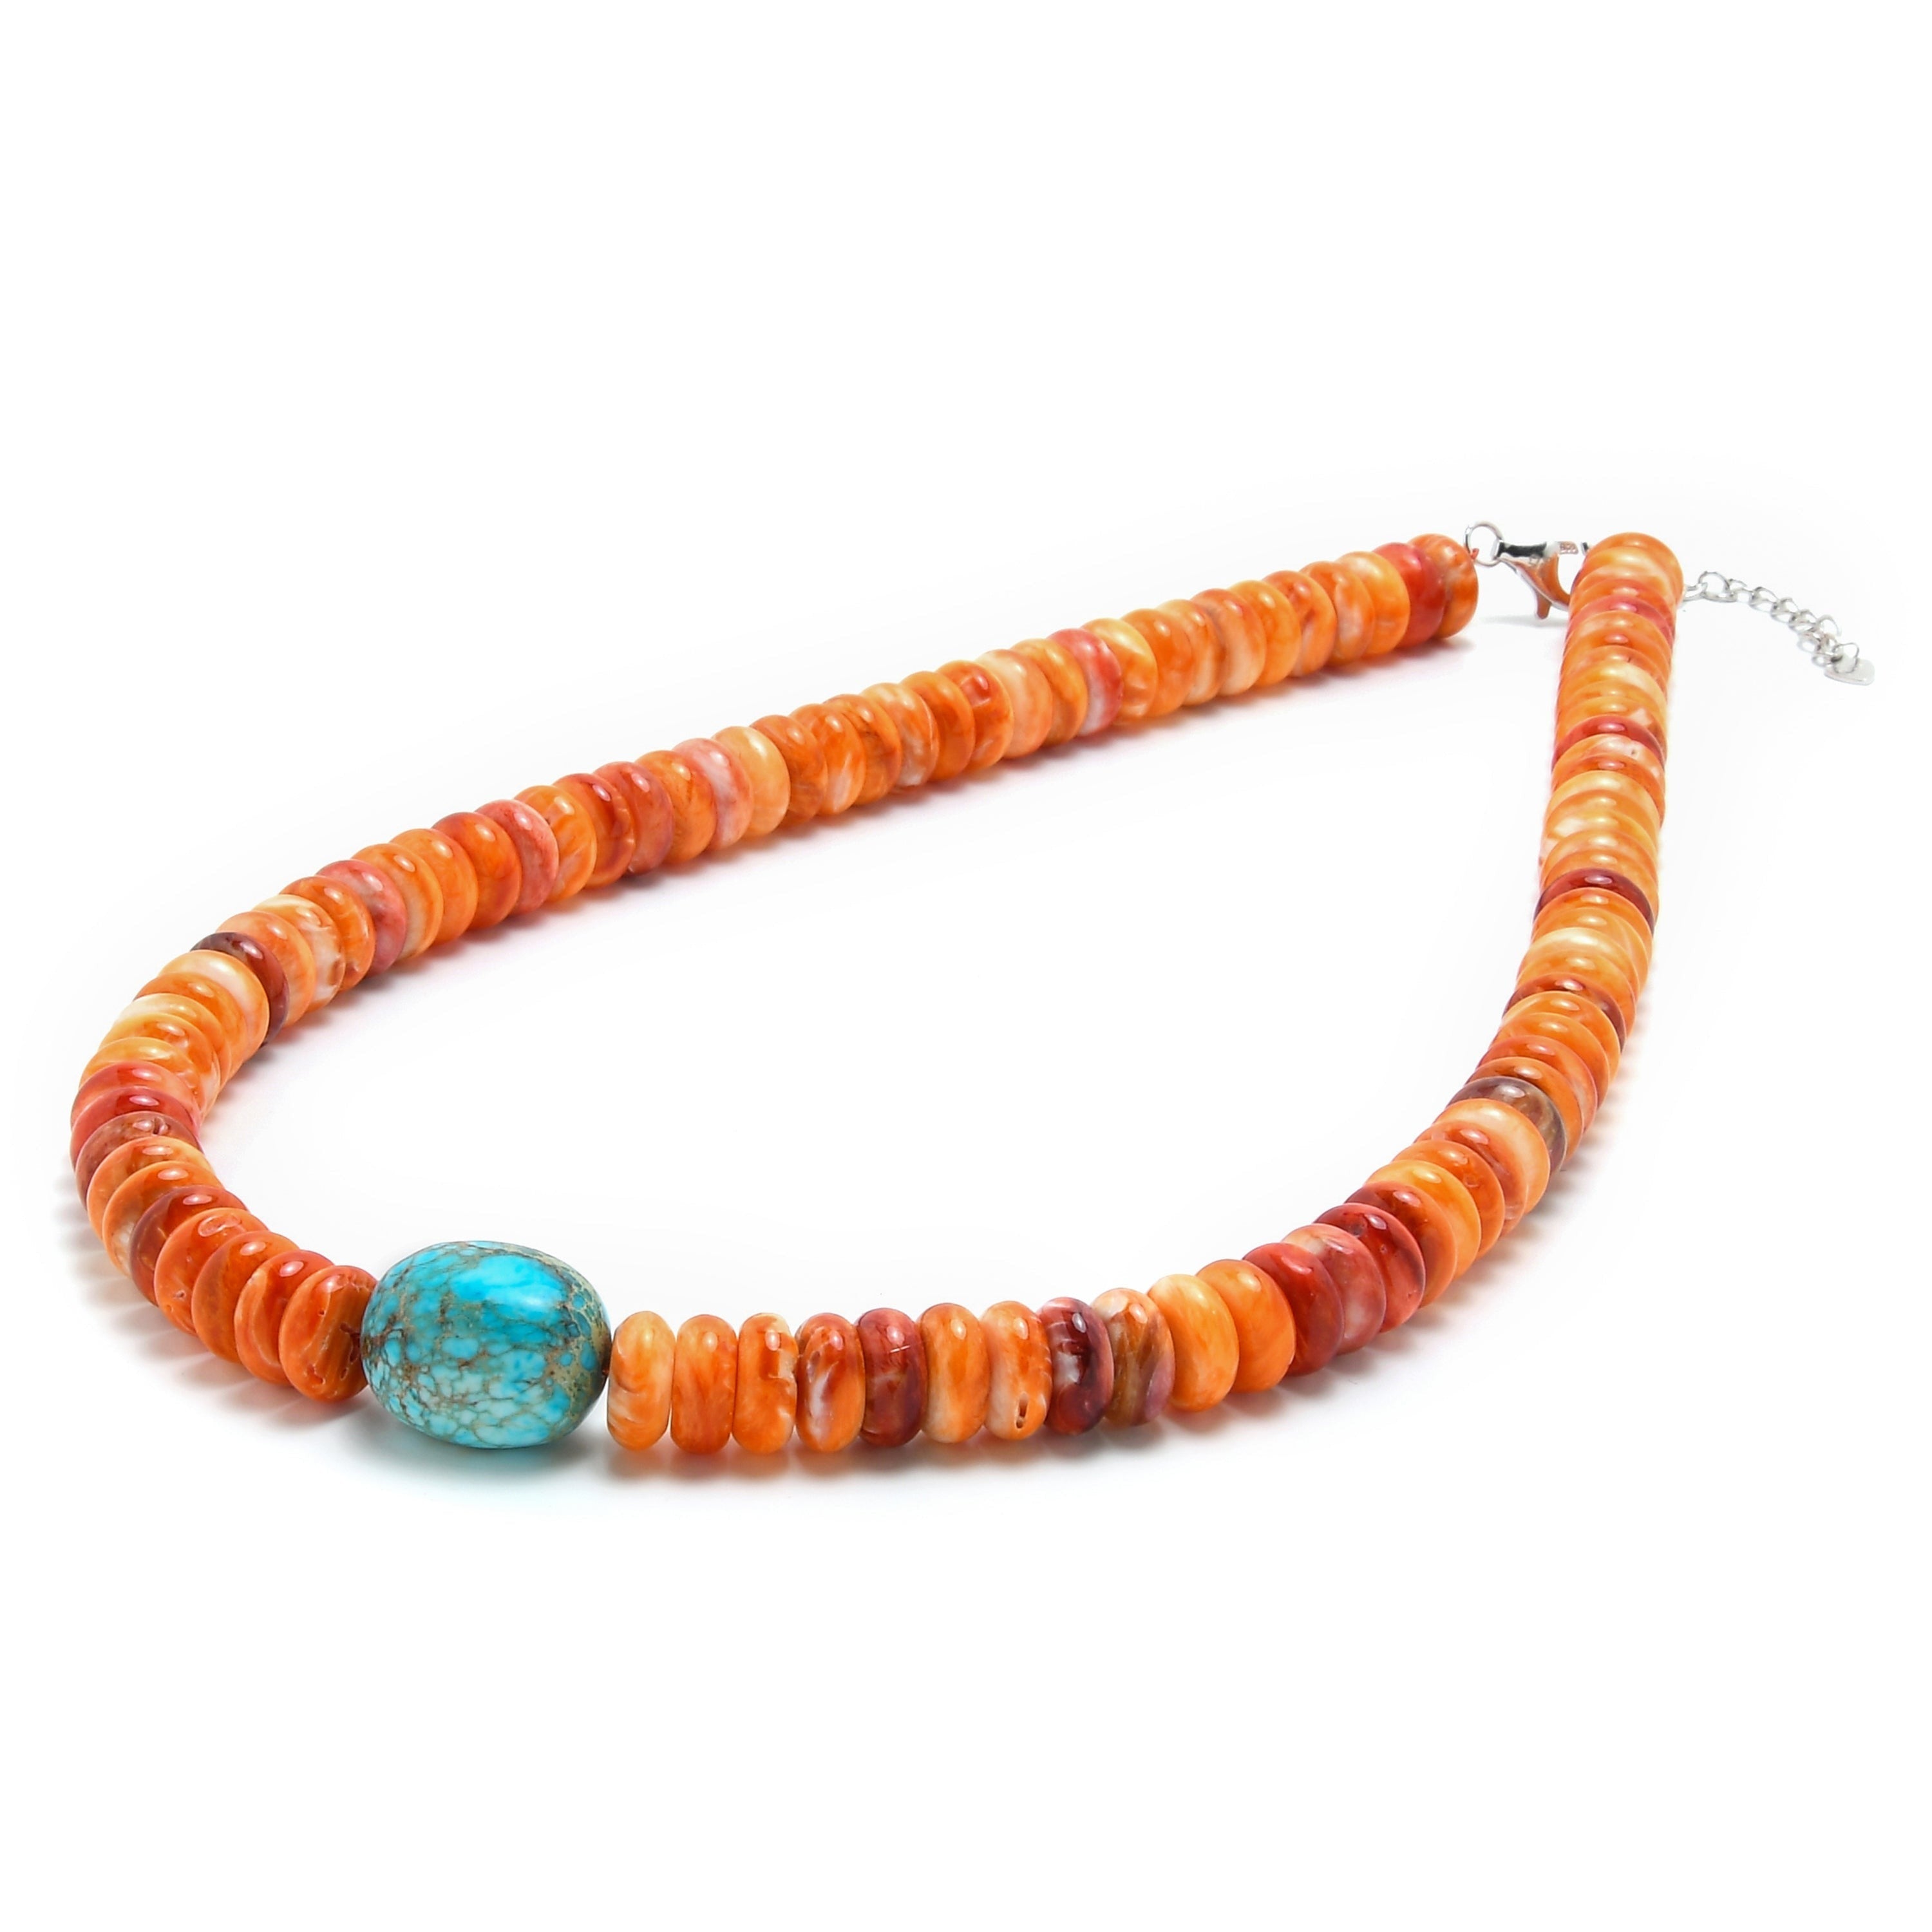 KALIFANO Gemstone Necklaces Spiny Oyster Shell & King Howlite Turquoise Necklace - 21" SKTN-10+13x18